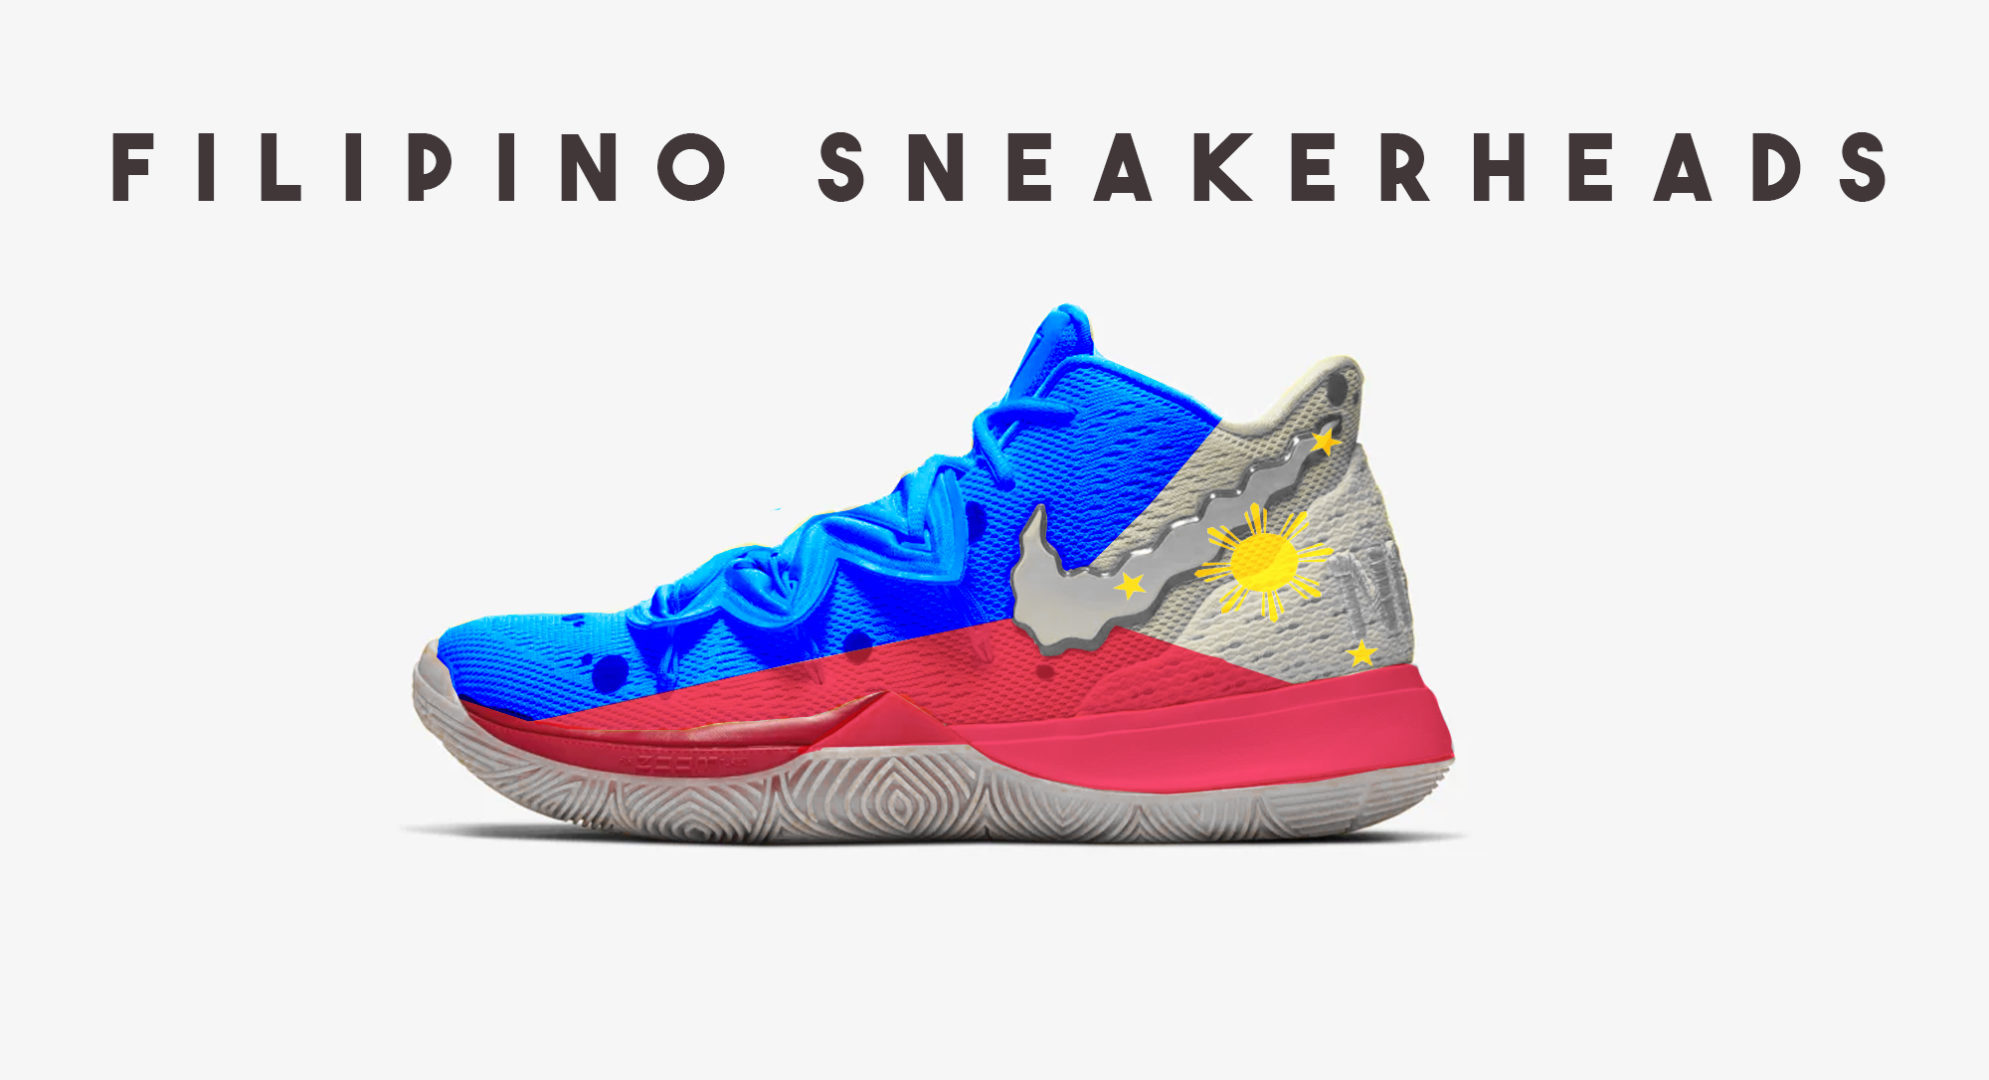 kyrie irving shoes in philippines